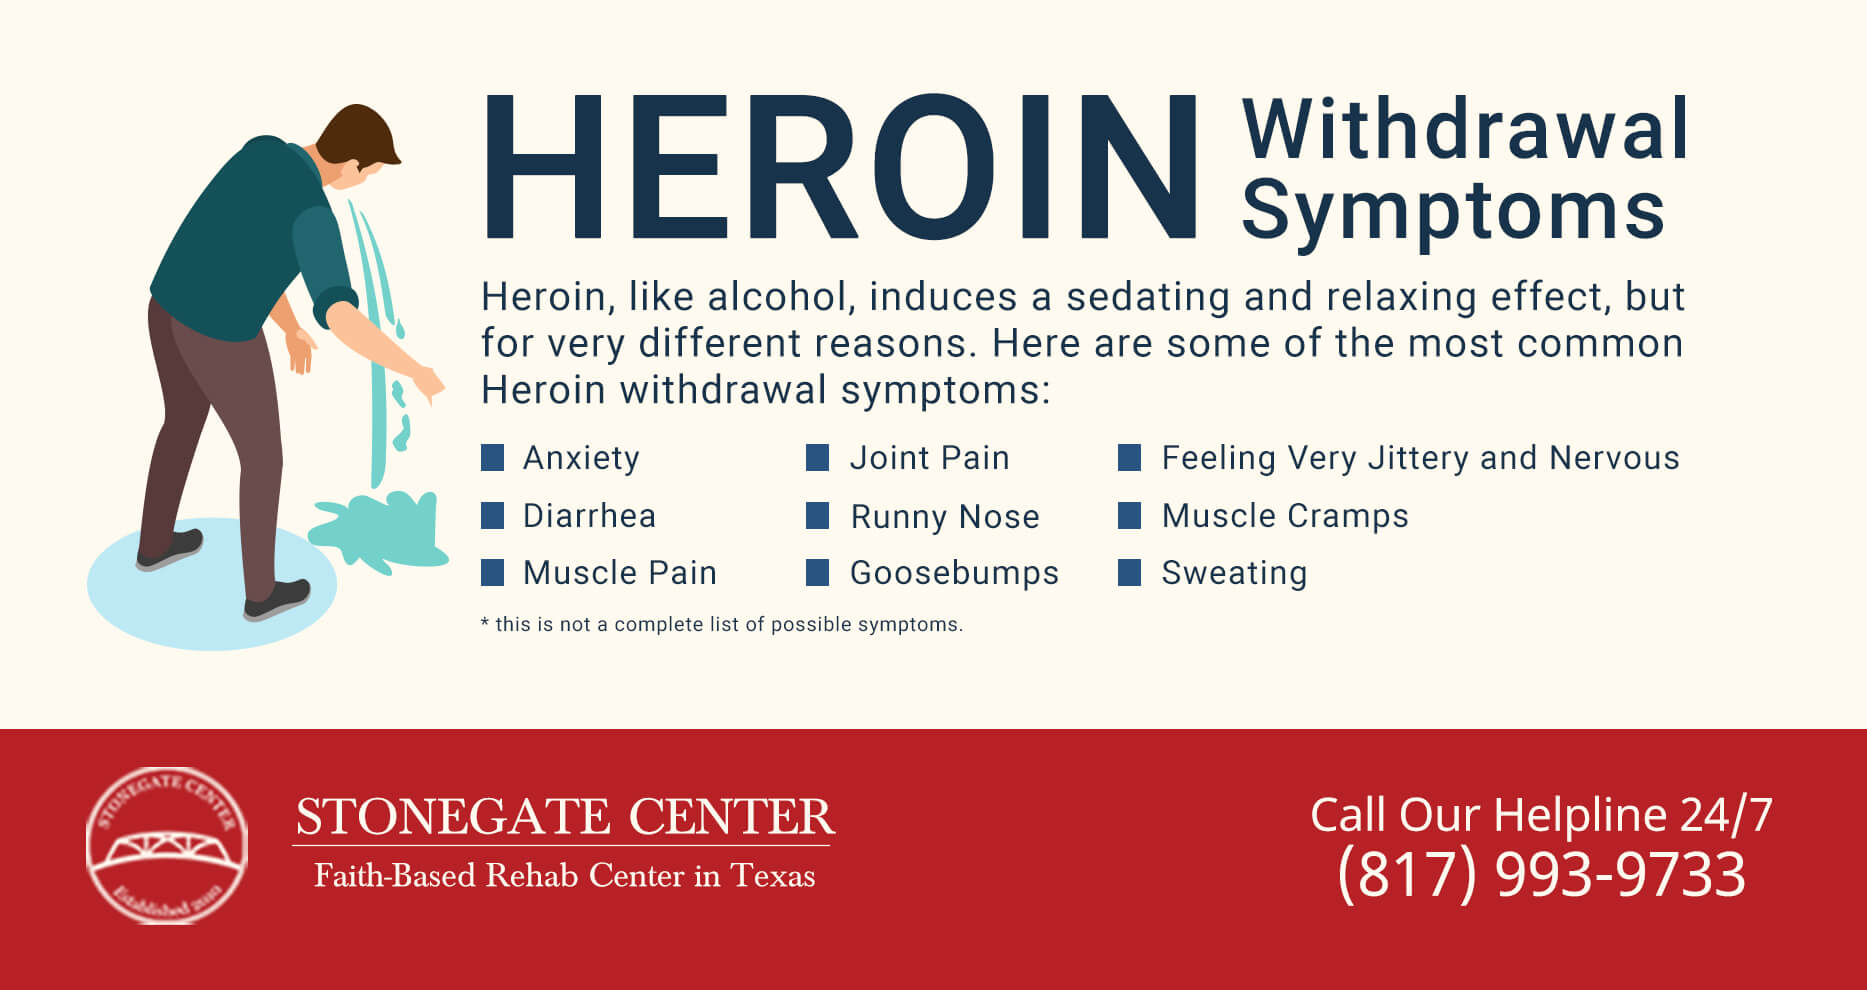 Stonegate Center Blog - Alcohol Withdrawal is More Dangerous Than Heroin Withdrawal - Heroin Withdrawal Symptoms Infographics